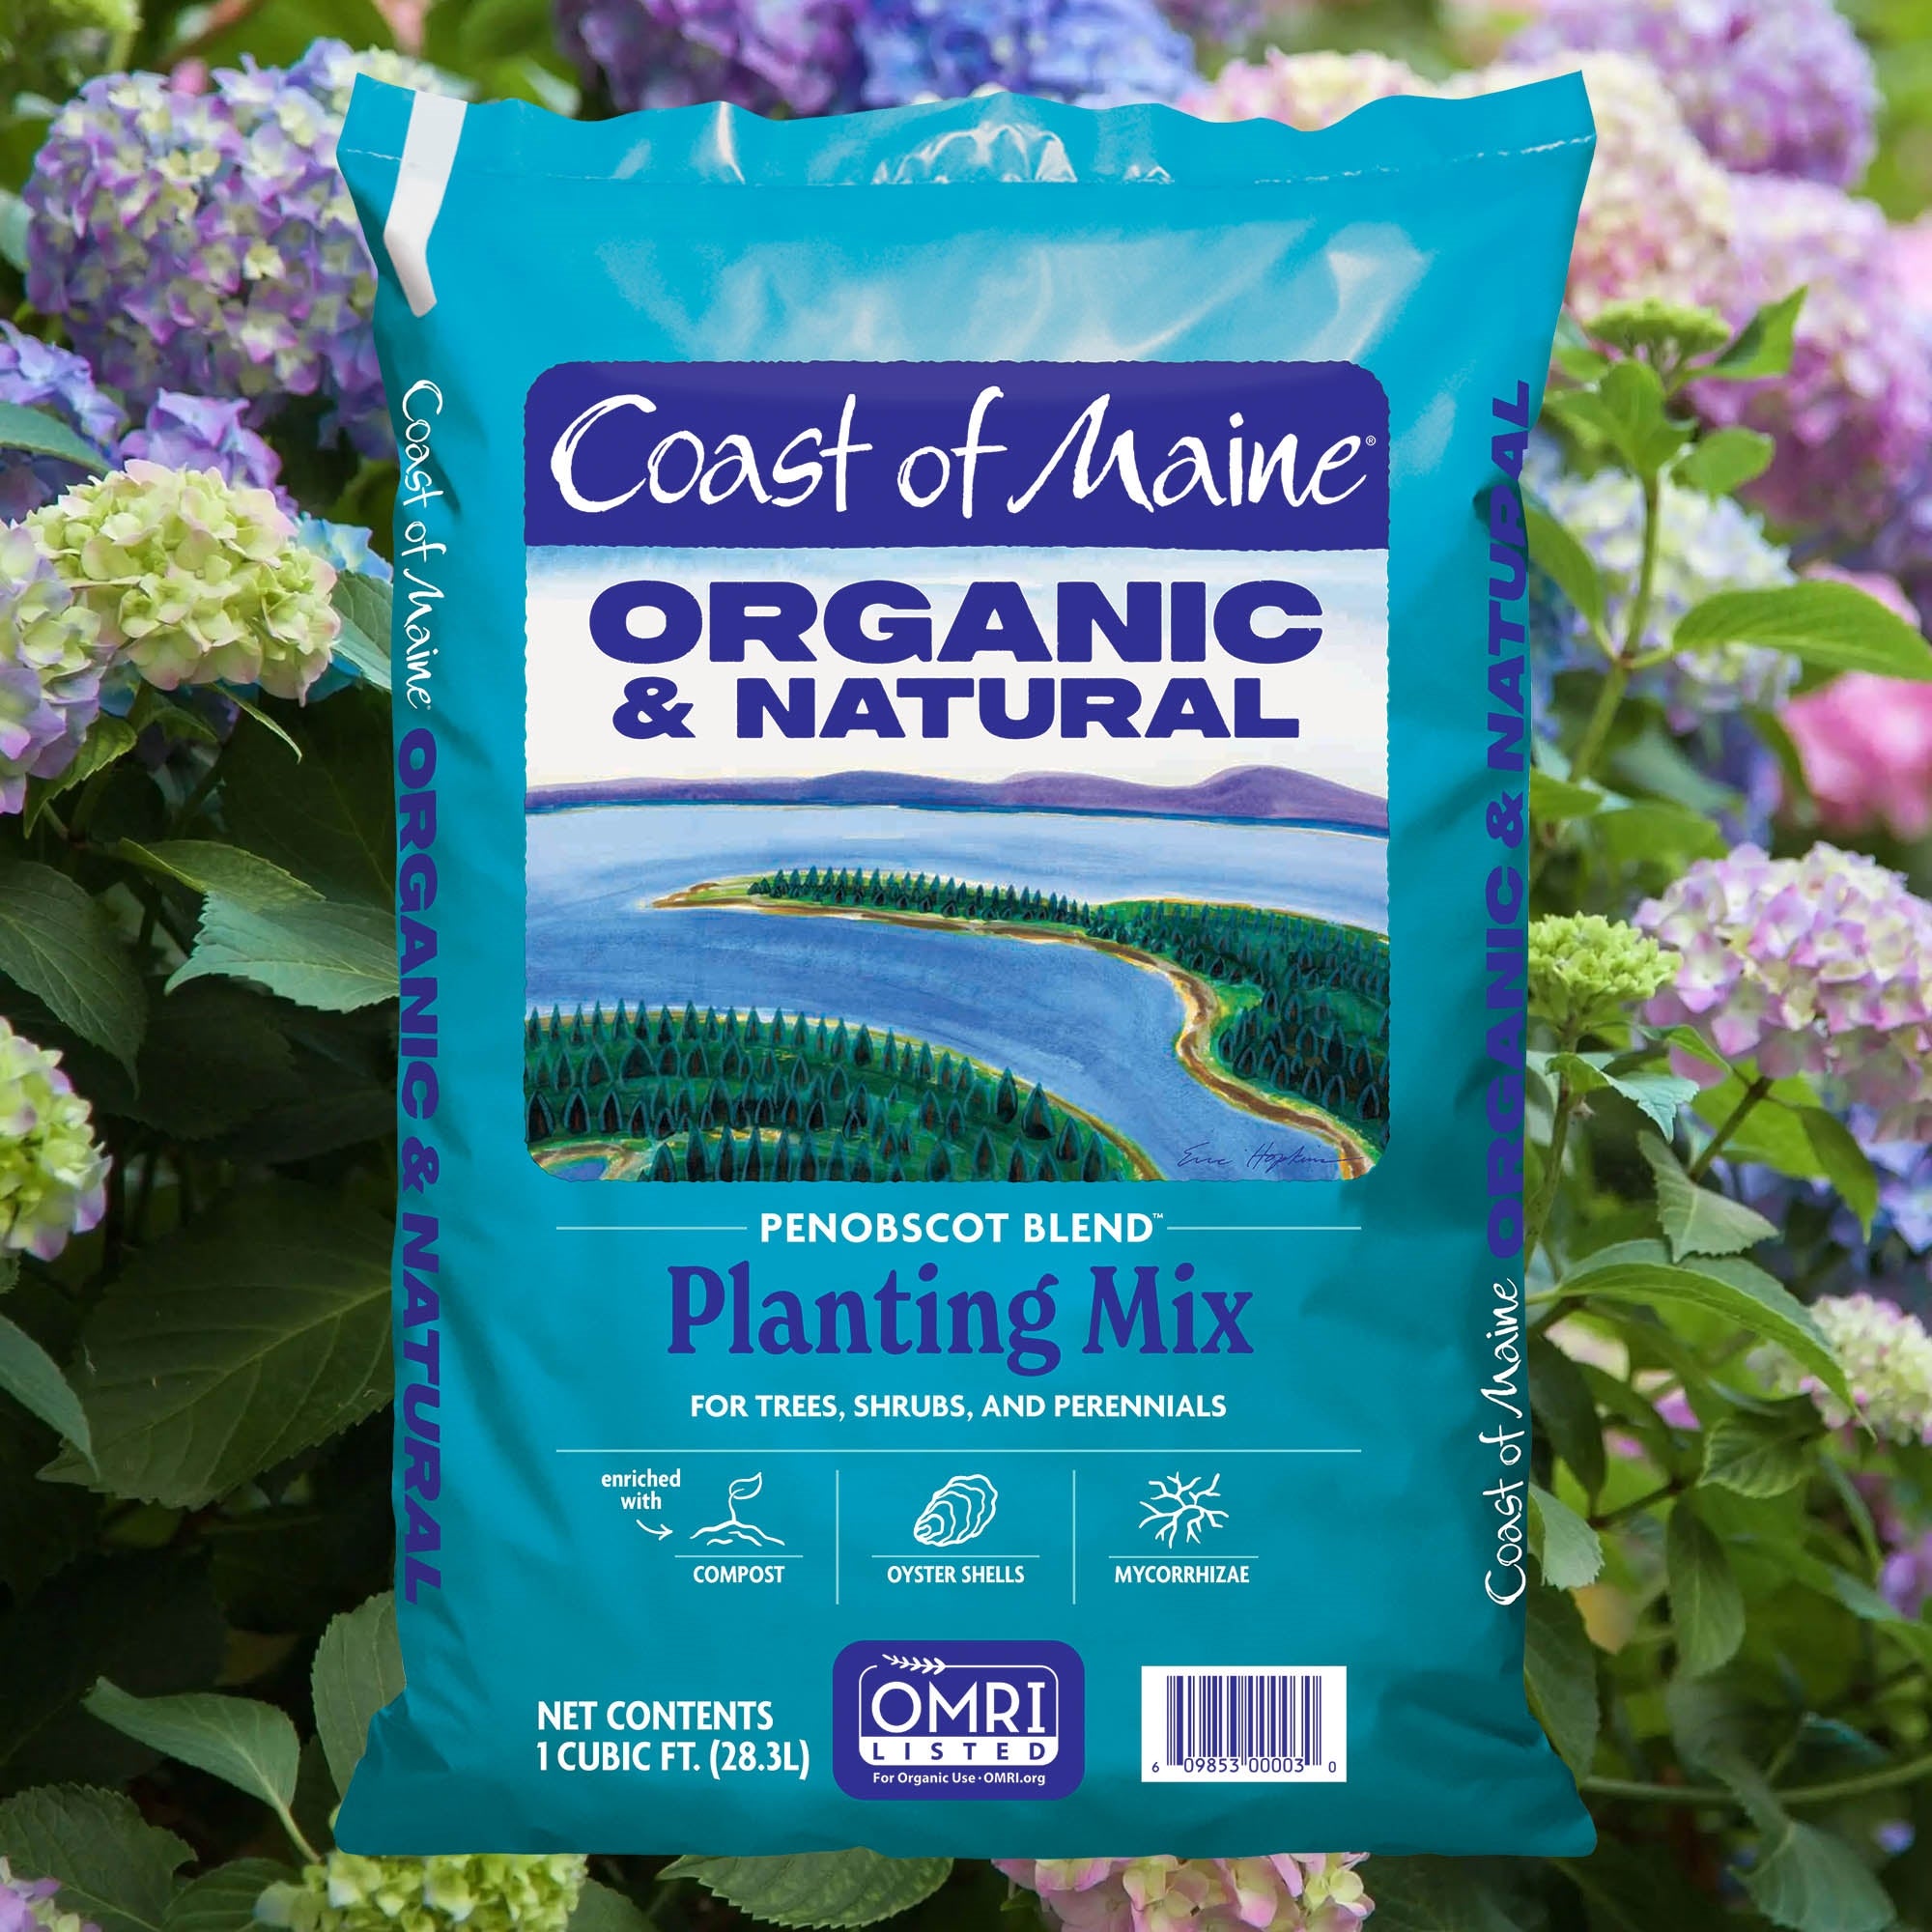 Coast of Maine Penobscot Blend Organic and Natural Planting Mix for Trees, Shrubs and Perennials, 1 cu ft